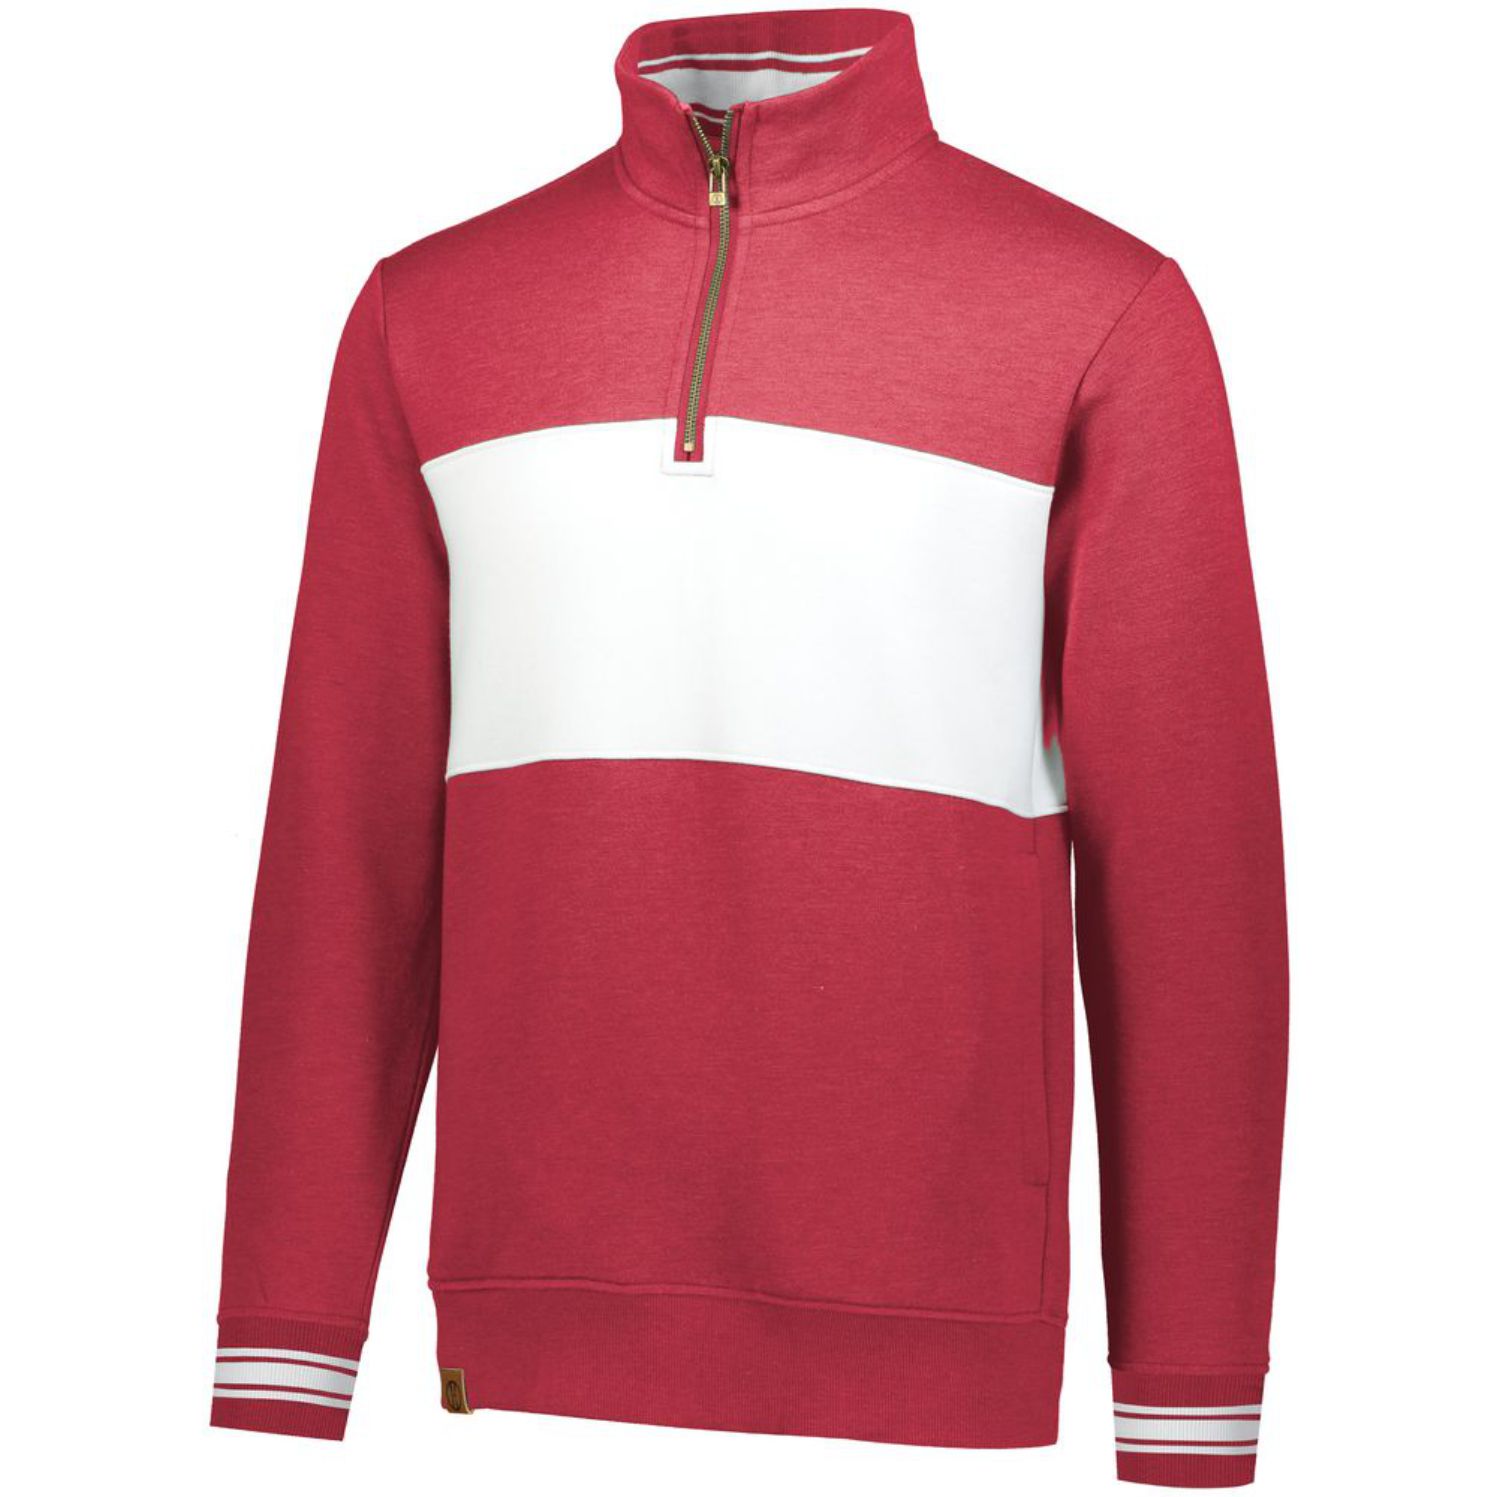 Holloway Ivy League Pullover #229565 Scarlet Heather